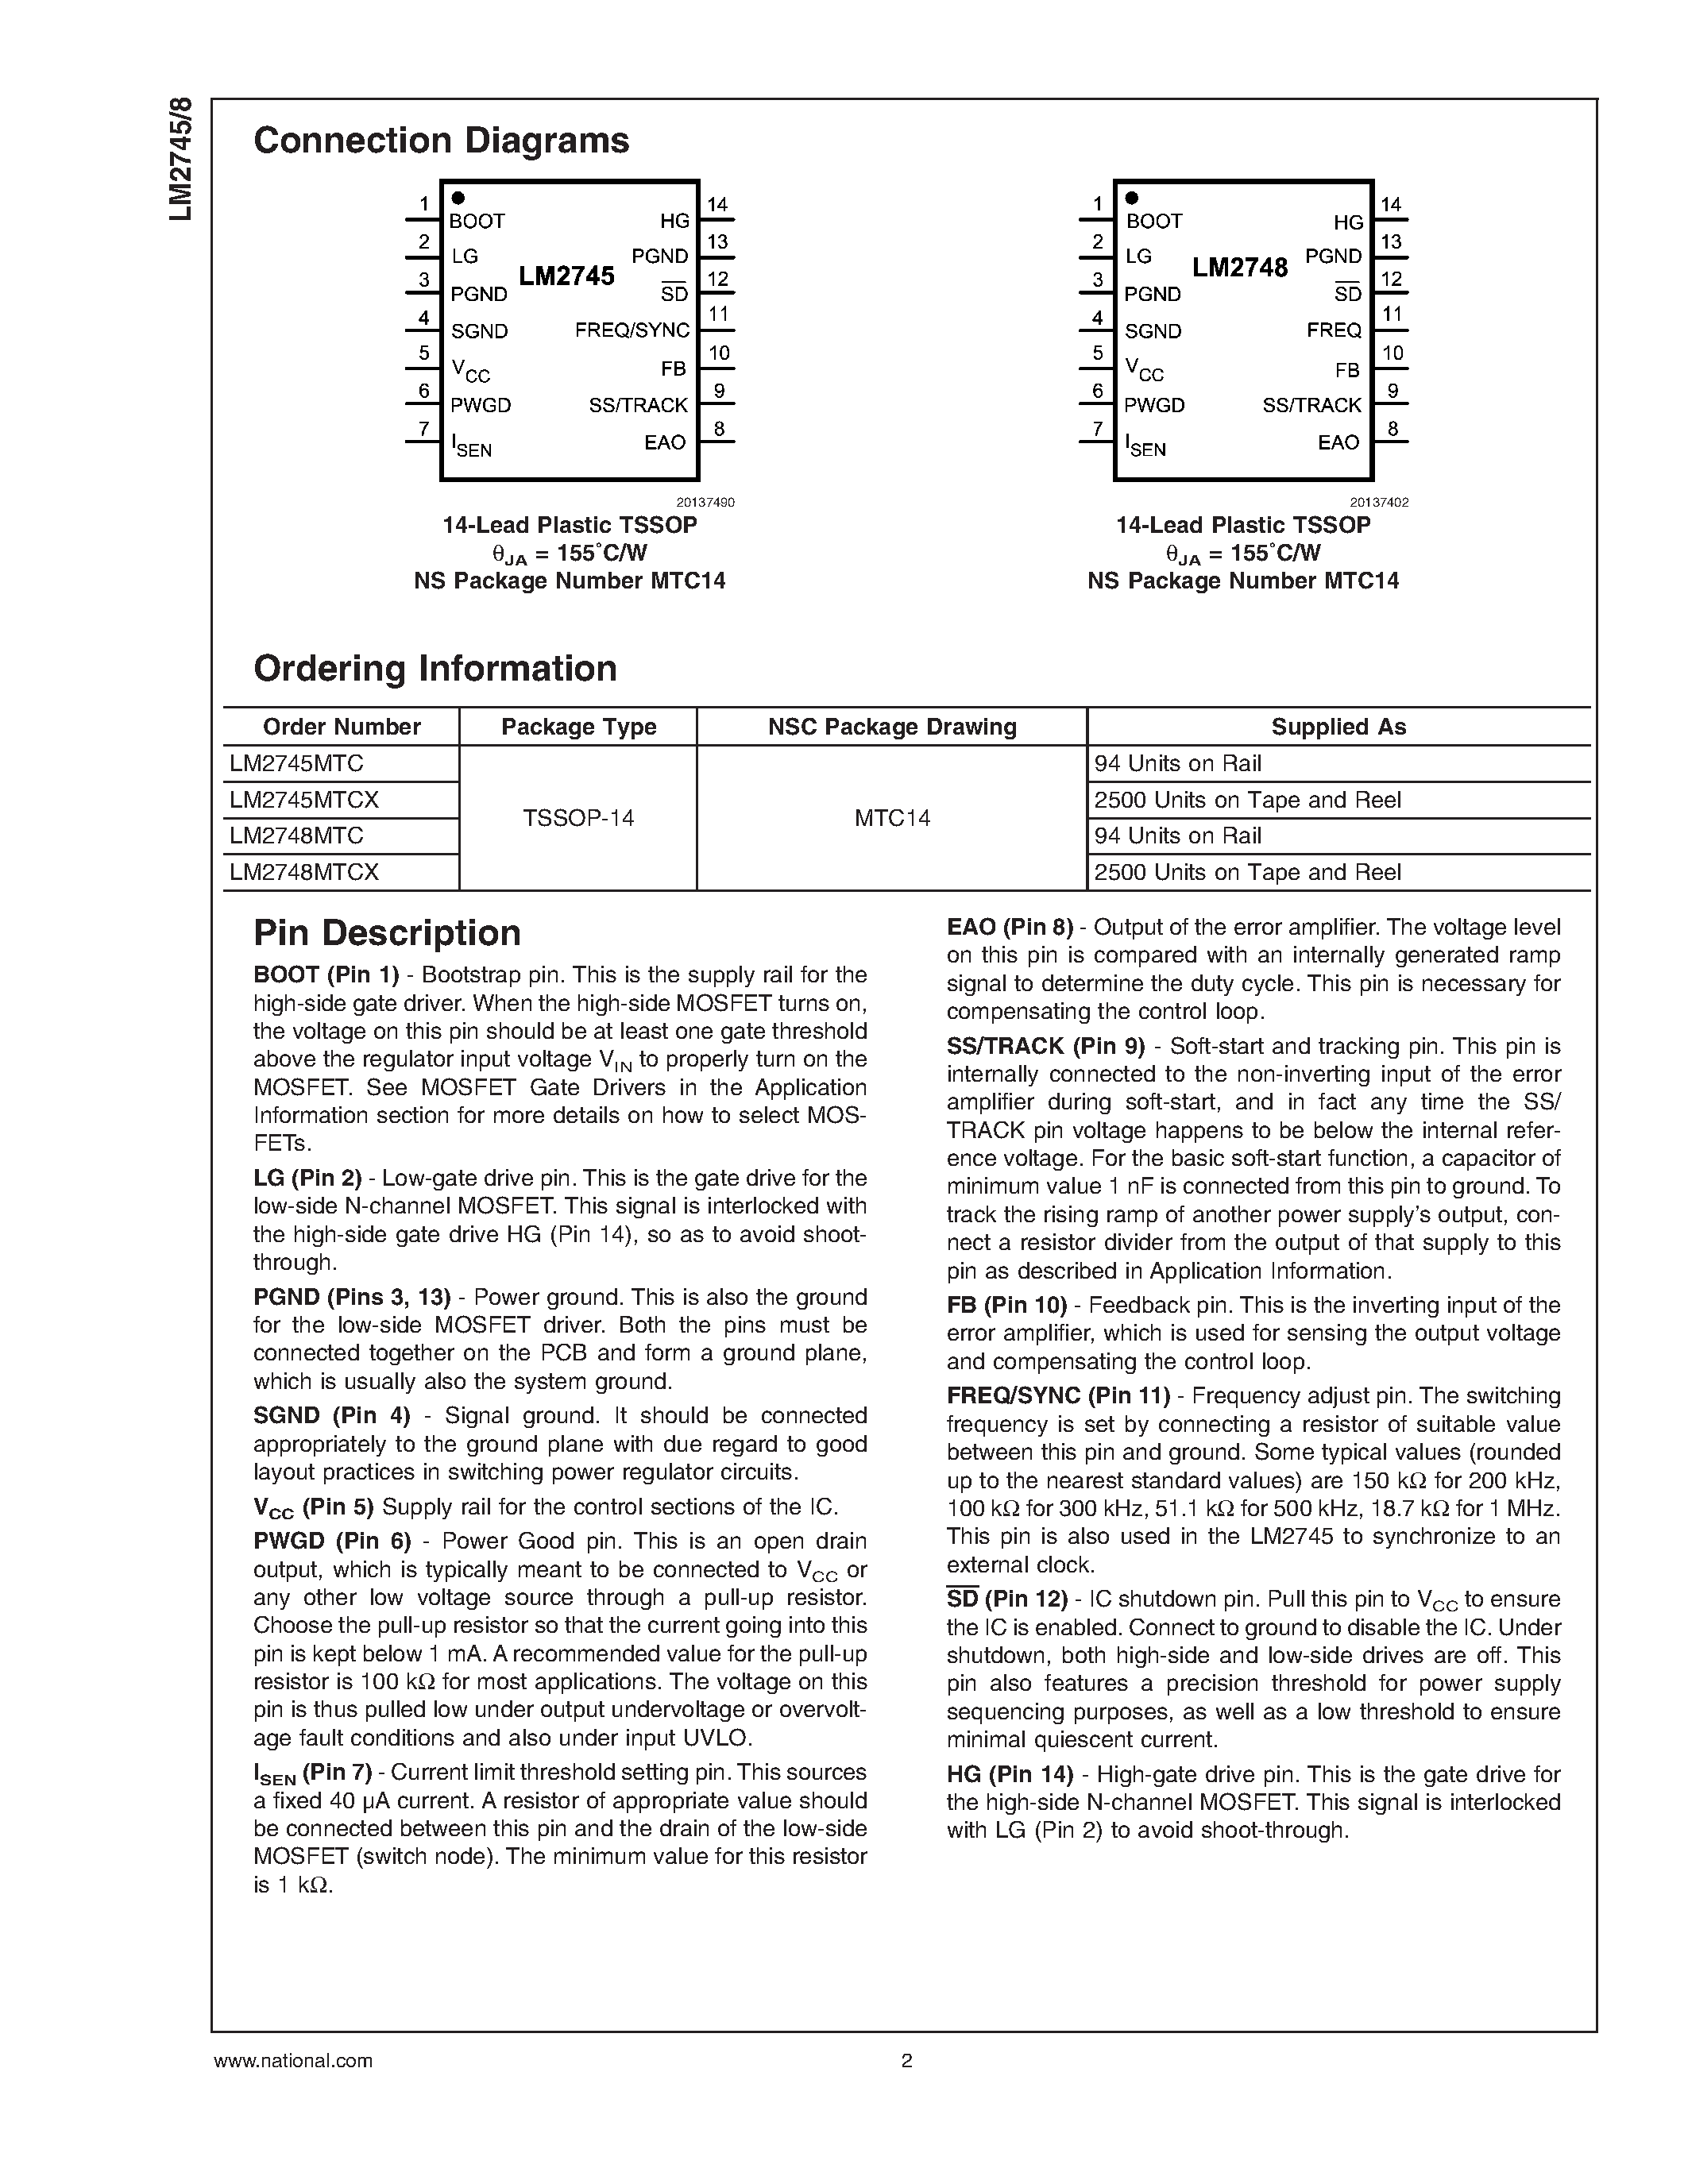 Datasheet LM2745 - (LM2745 / LM2748) Synchronous Buck Controller page 2